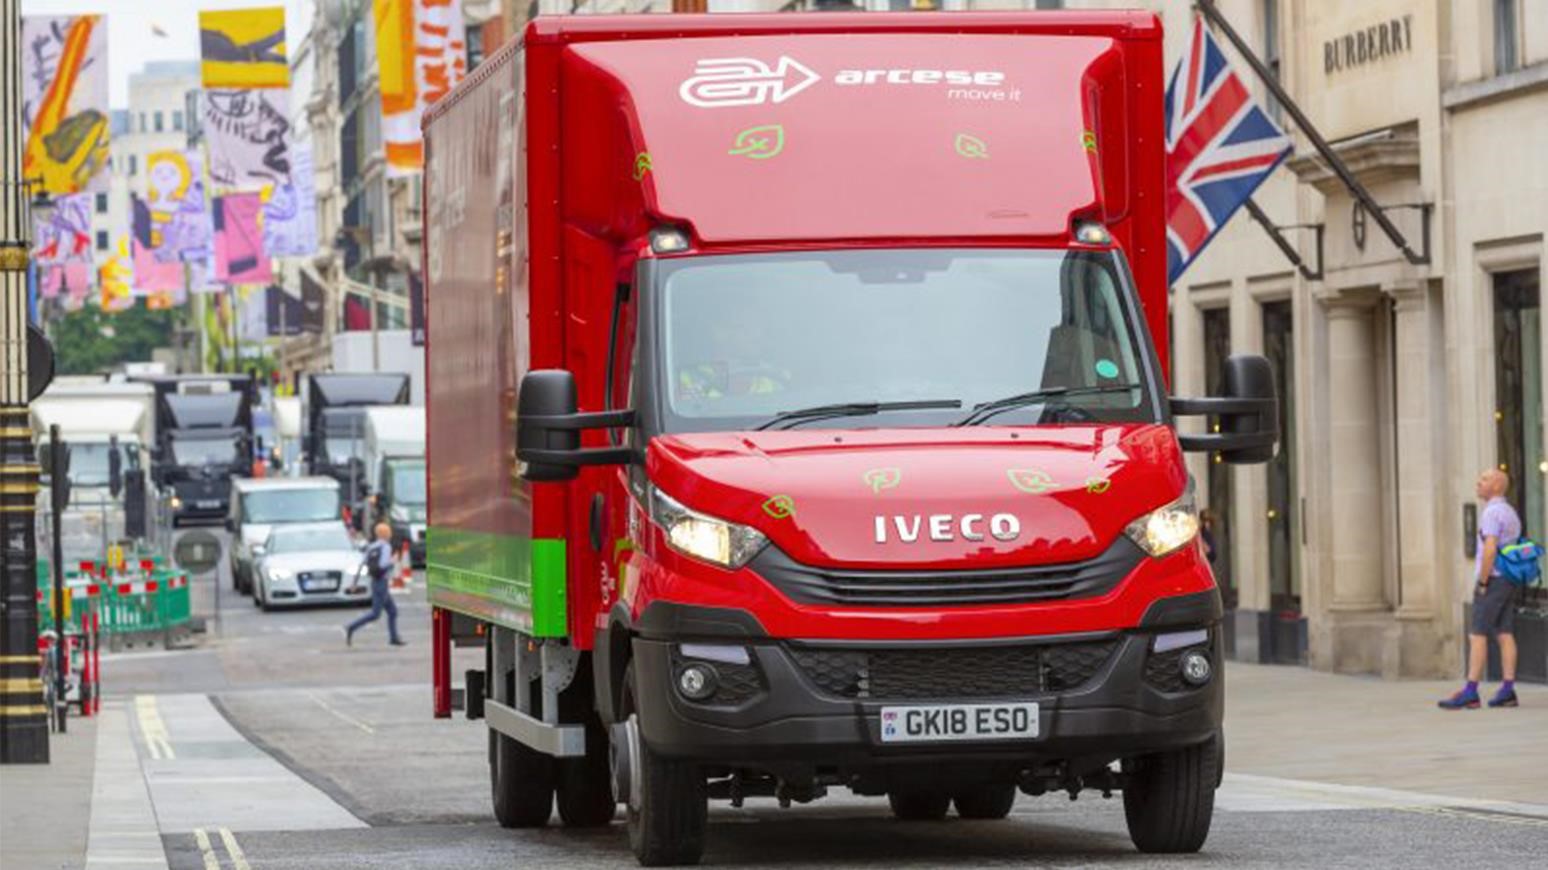 IVECO Helps Arcese With ULEZ